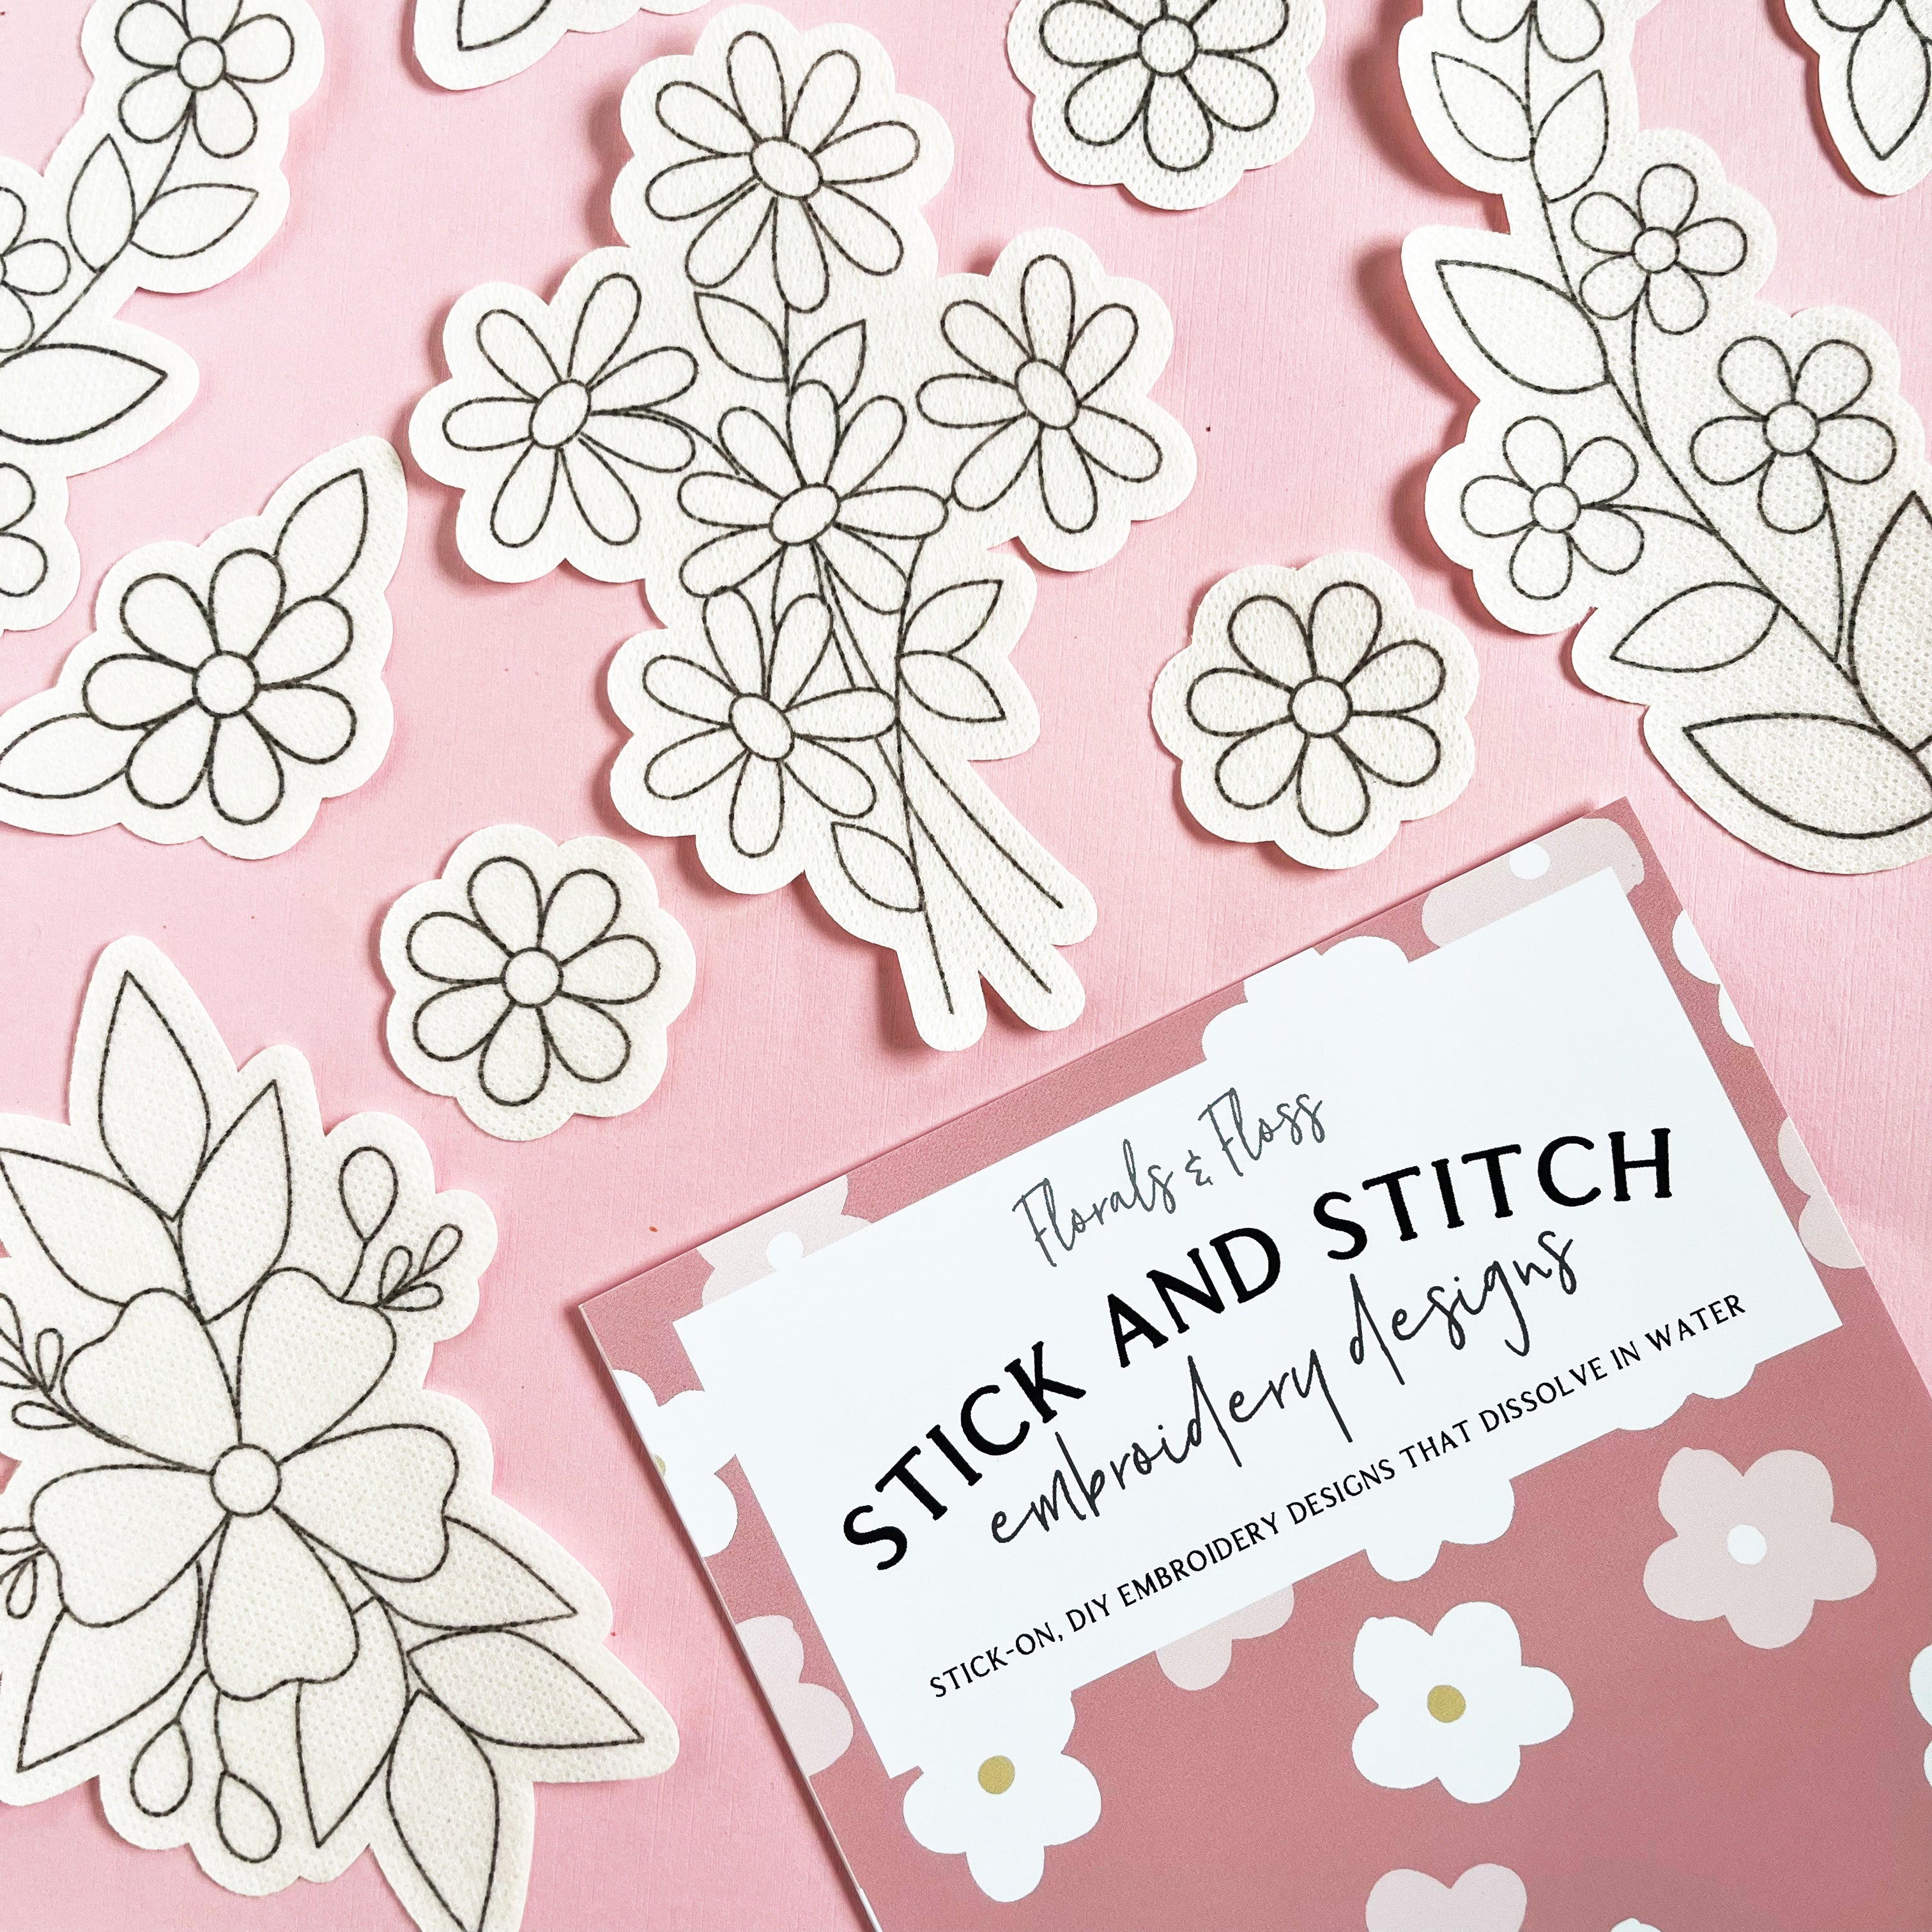 Stickr 12 Washable Embroidery Stickers Floral Embroidery Stick & Stitch  Patches Stickers Embroidery Patterns for Beginners 